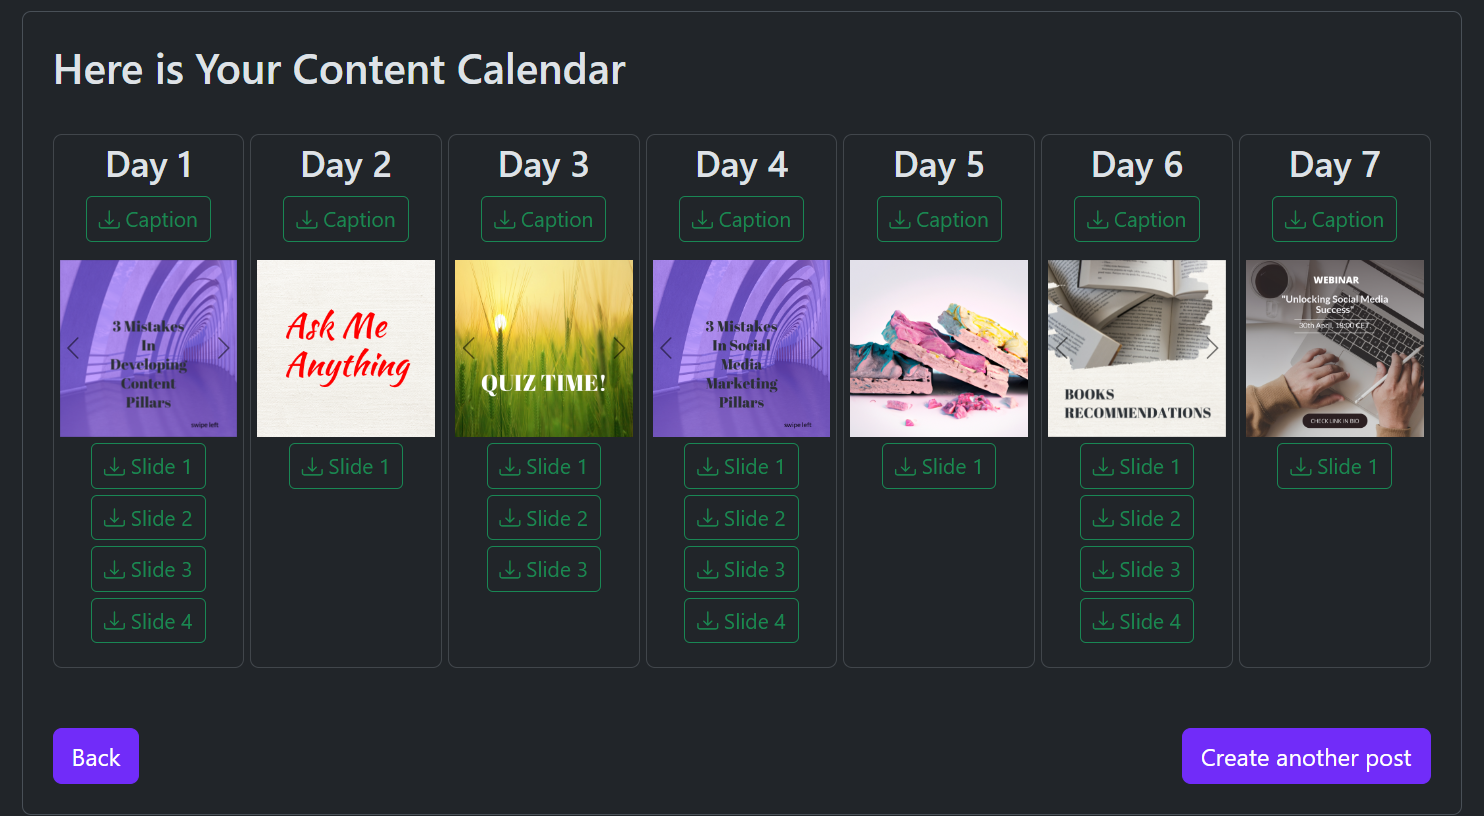 Instagram Content Plan Overview: Mysmmai allows you to select relevant subtopics within each content pillar. The final post topic will be visible in the ready-to-use post. For example, within the 'Useful Content Pillar,' you can find 'How-To' Instagram Ca